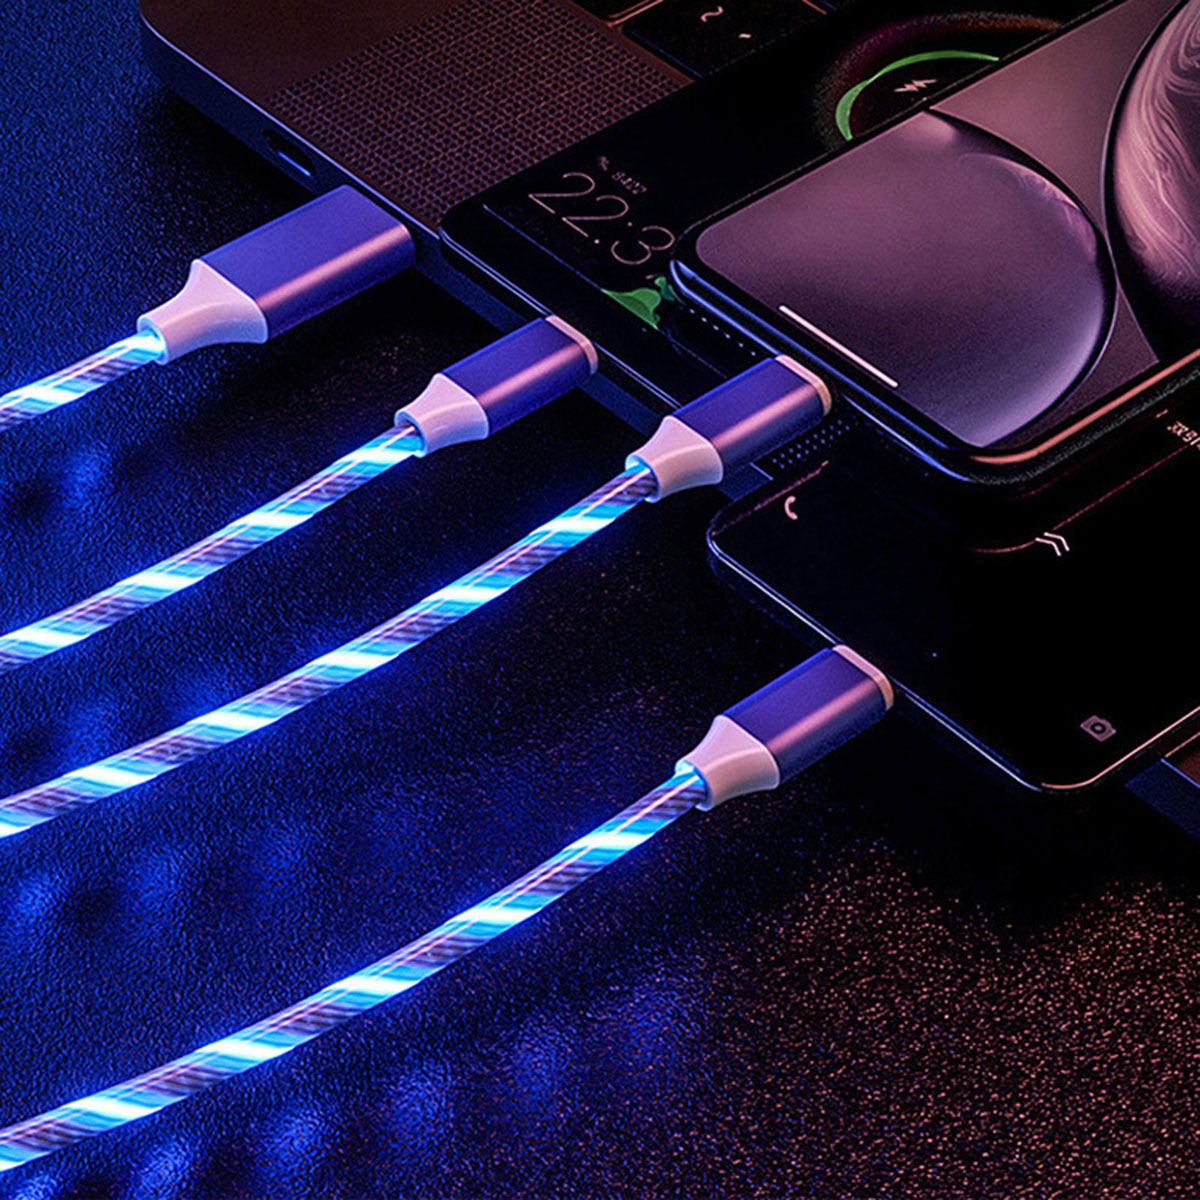 Platinet USB USB A - USB Type-C charging cable with LED color light effect BLUE - 2A, 1m, *USBAM, *USBCM